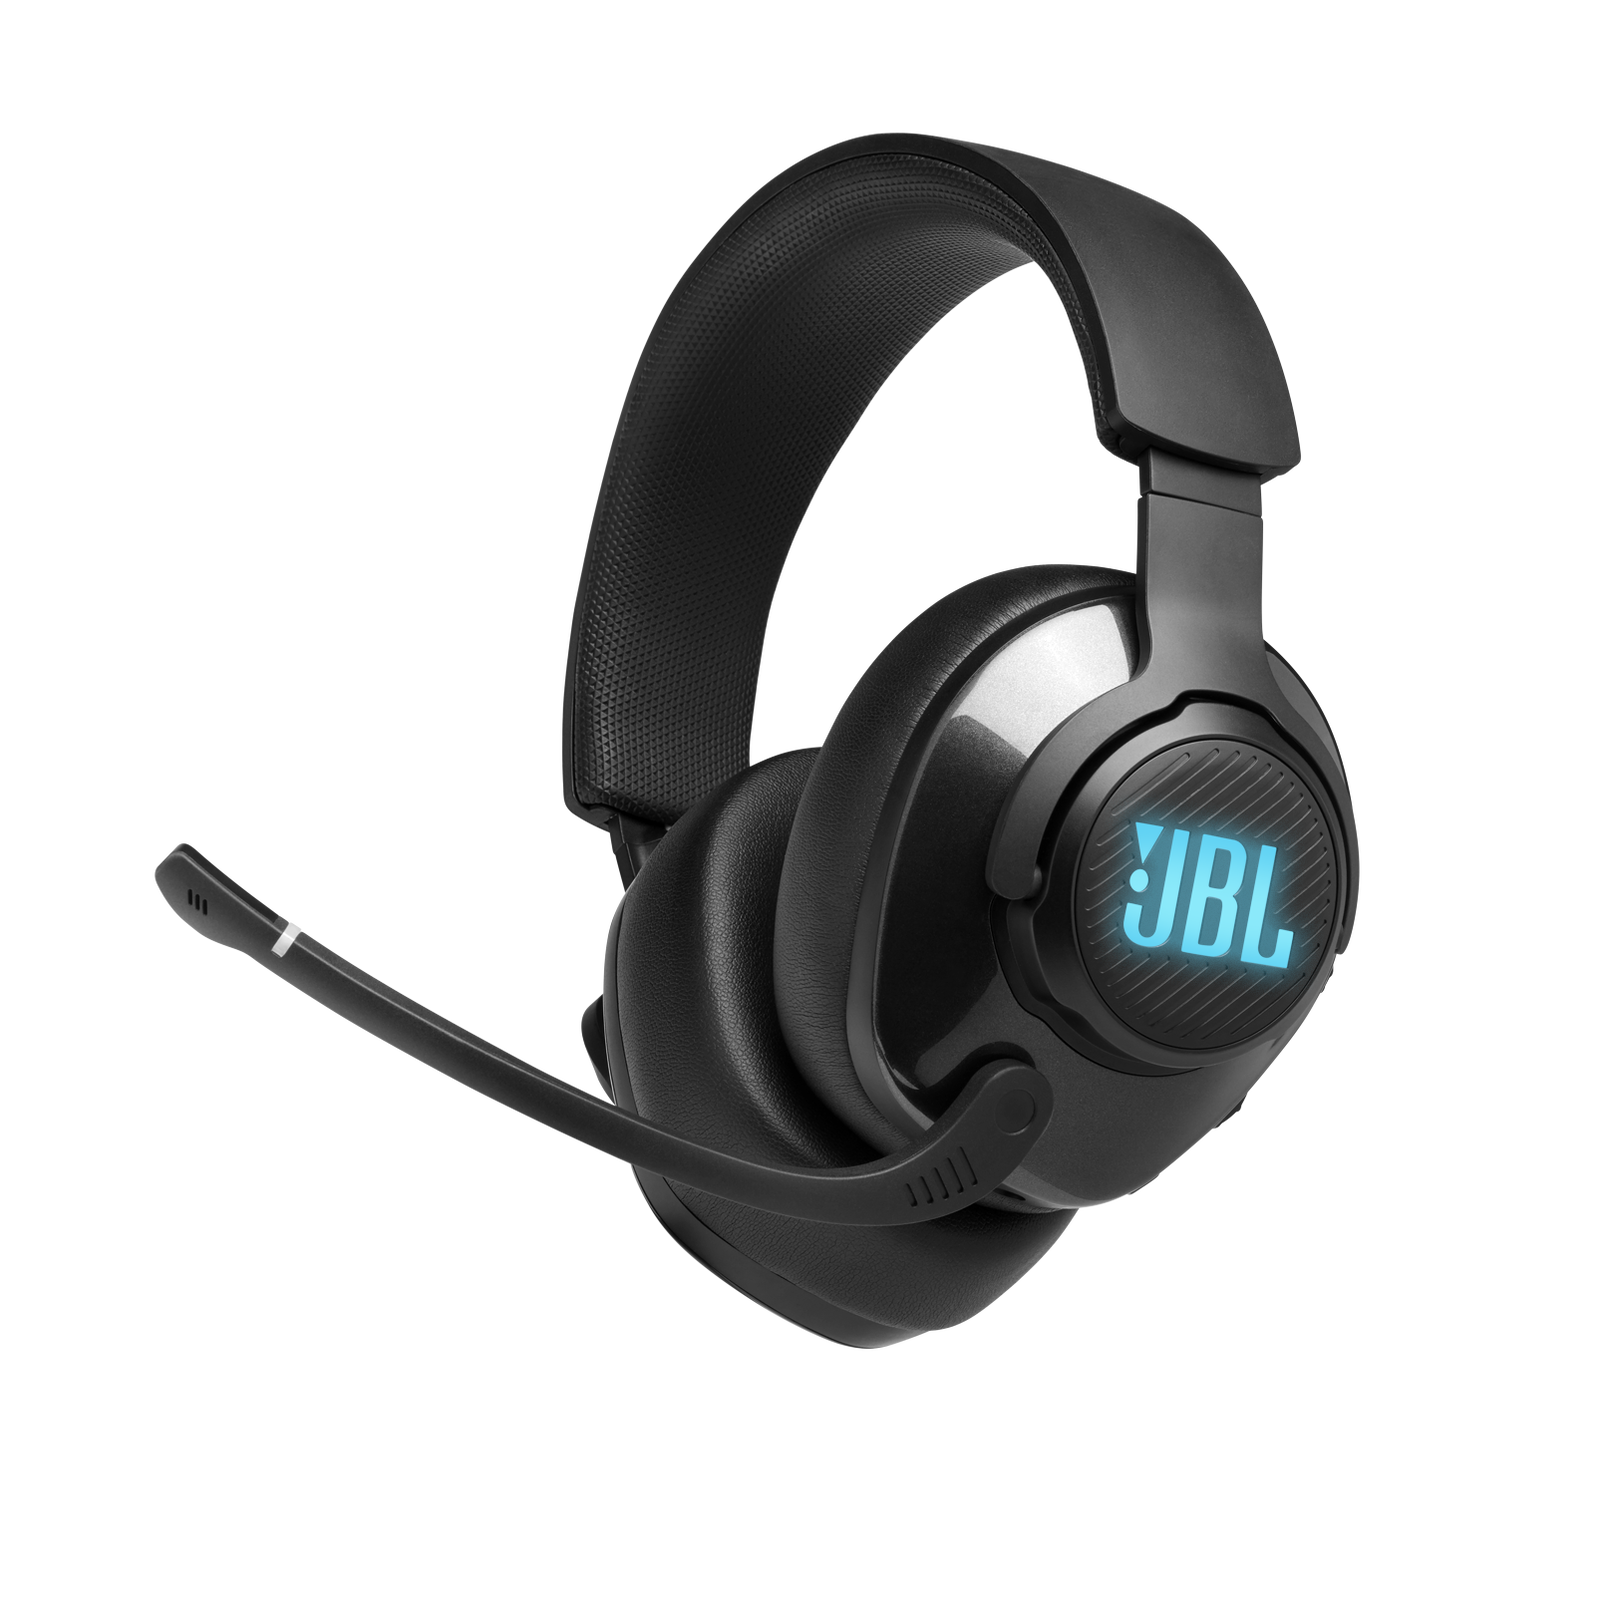 JBL Quantum 400 Black | Over-Ear Wired Gaming Headset - JBL 7.1 Surround Sound & Mic Noise Cancelling - PS5/XBOX One/Switch/PC Compatible Gaming Headset REFURBISHED